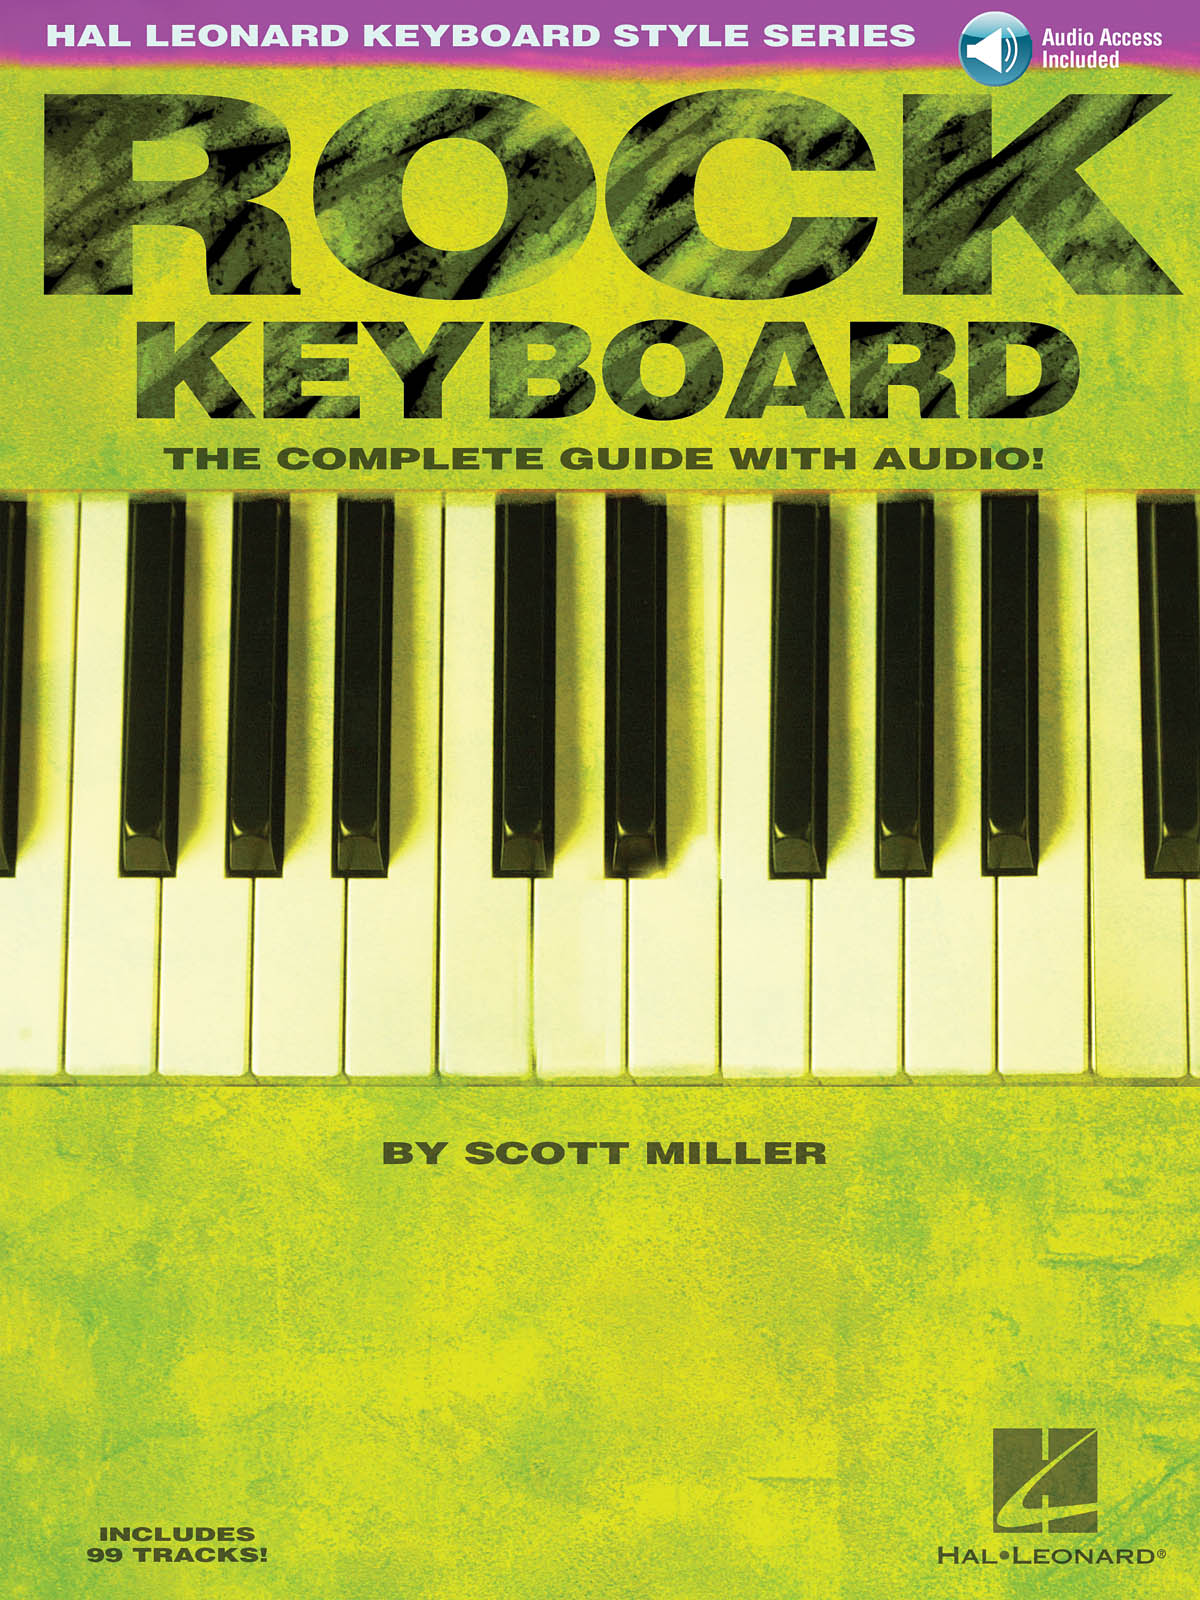 Rock Keyboard - The Complete Guide with CD! - pro keyboard